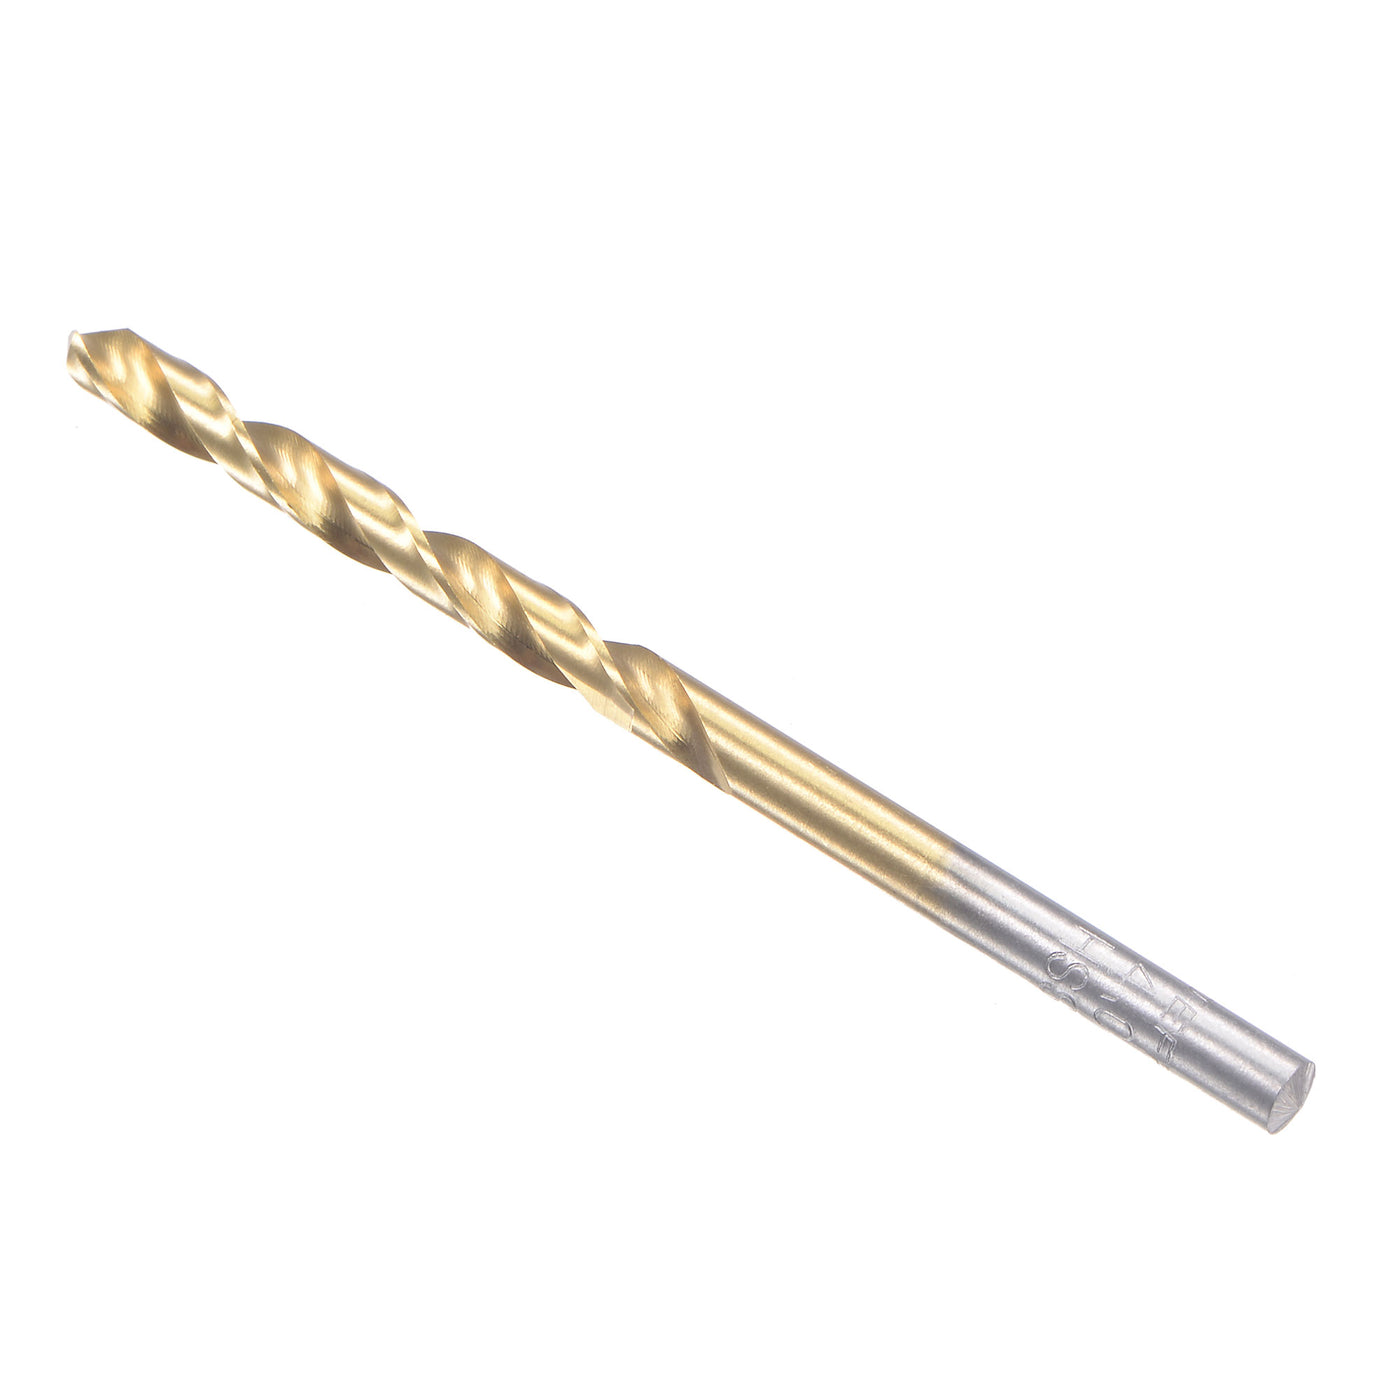 uxcell Uxcell High Speed Steel Twist Drill Bit 4mm Fully Ground Titanium Coated 2 Pcs